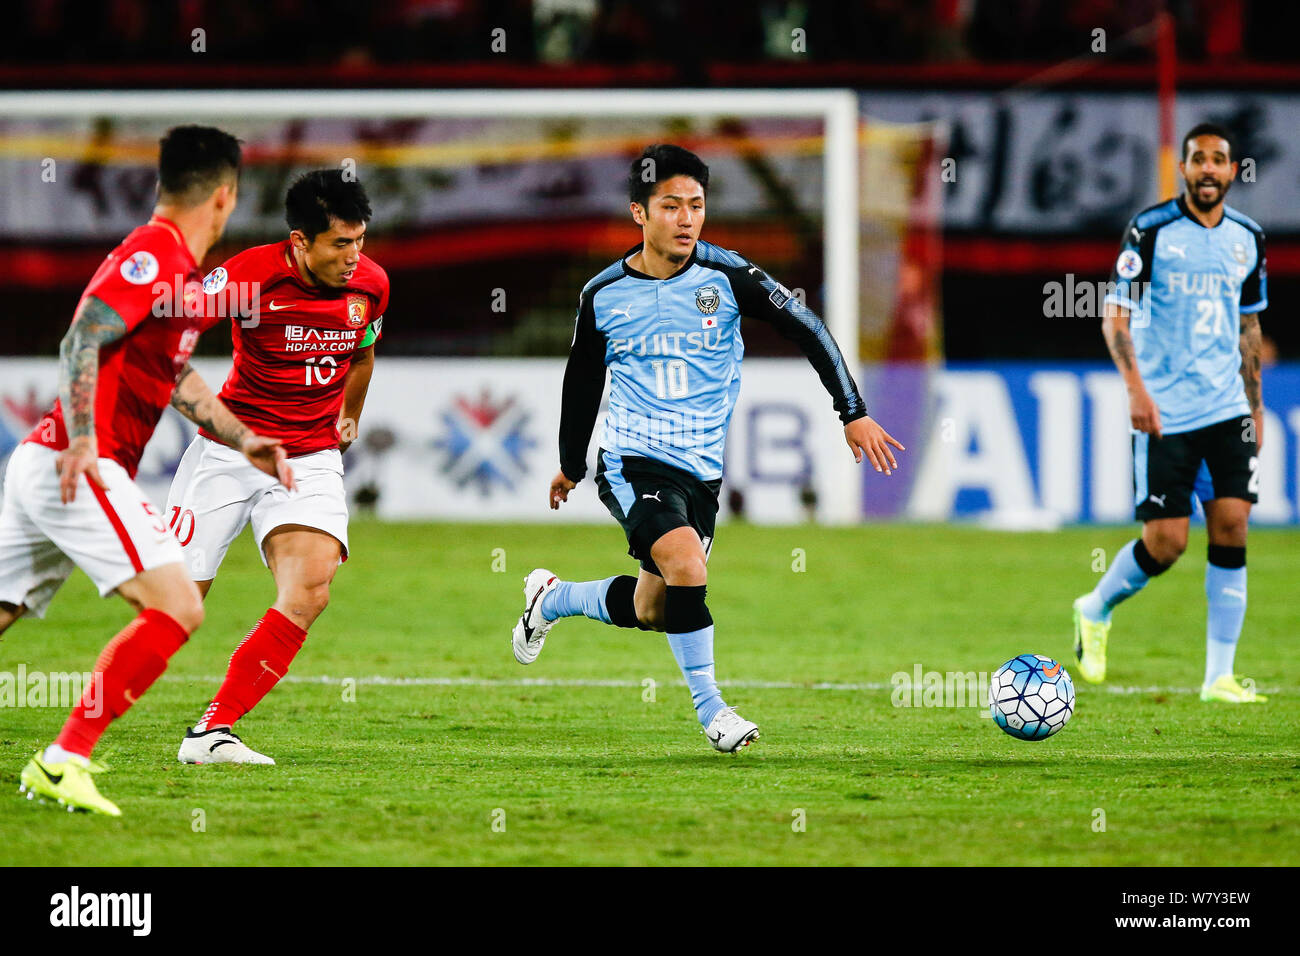 Ryota Oshima of Japan's Kawasaki Frontale F.C., second right, dribbles against China's Guangzhou Evergrande F.C. in their Group G match during the AFC Stock Photo